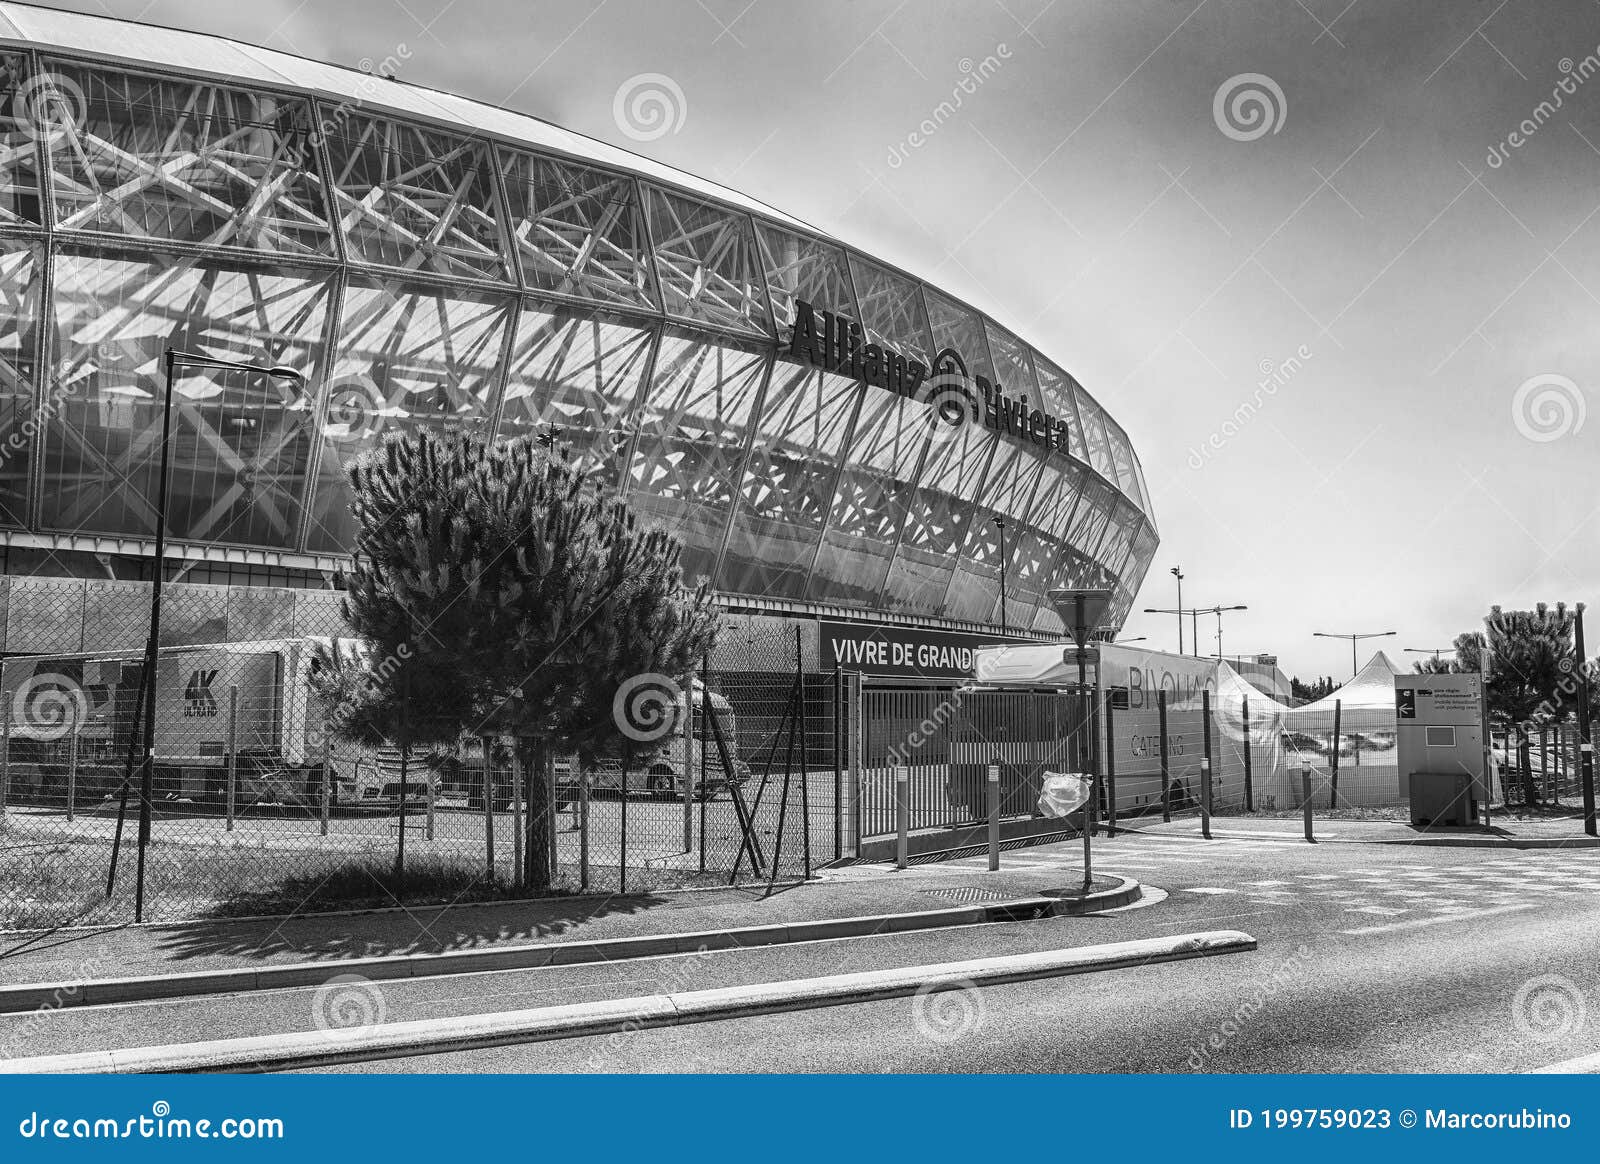 Allianz Riviera Stade De Nice Cote D Azur France Editorial Stock Photo Image Of Sightseeing Pitch